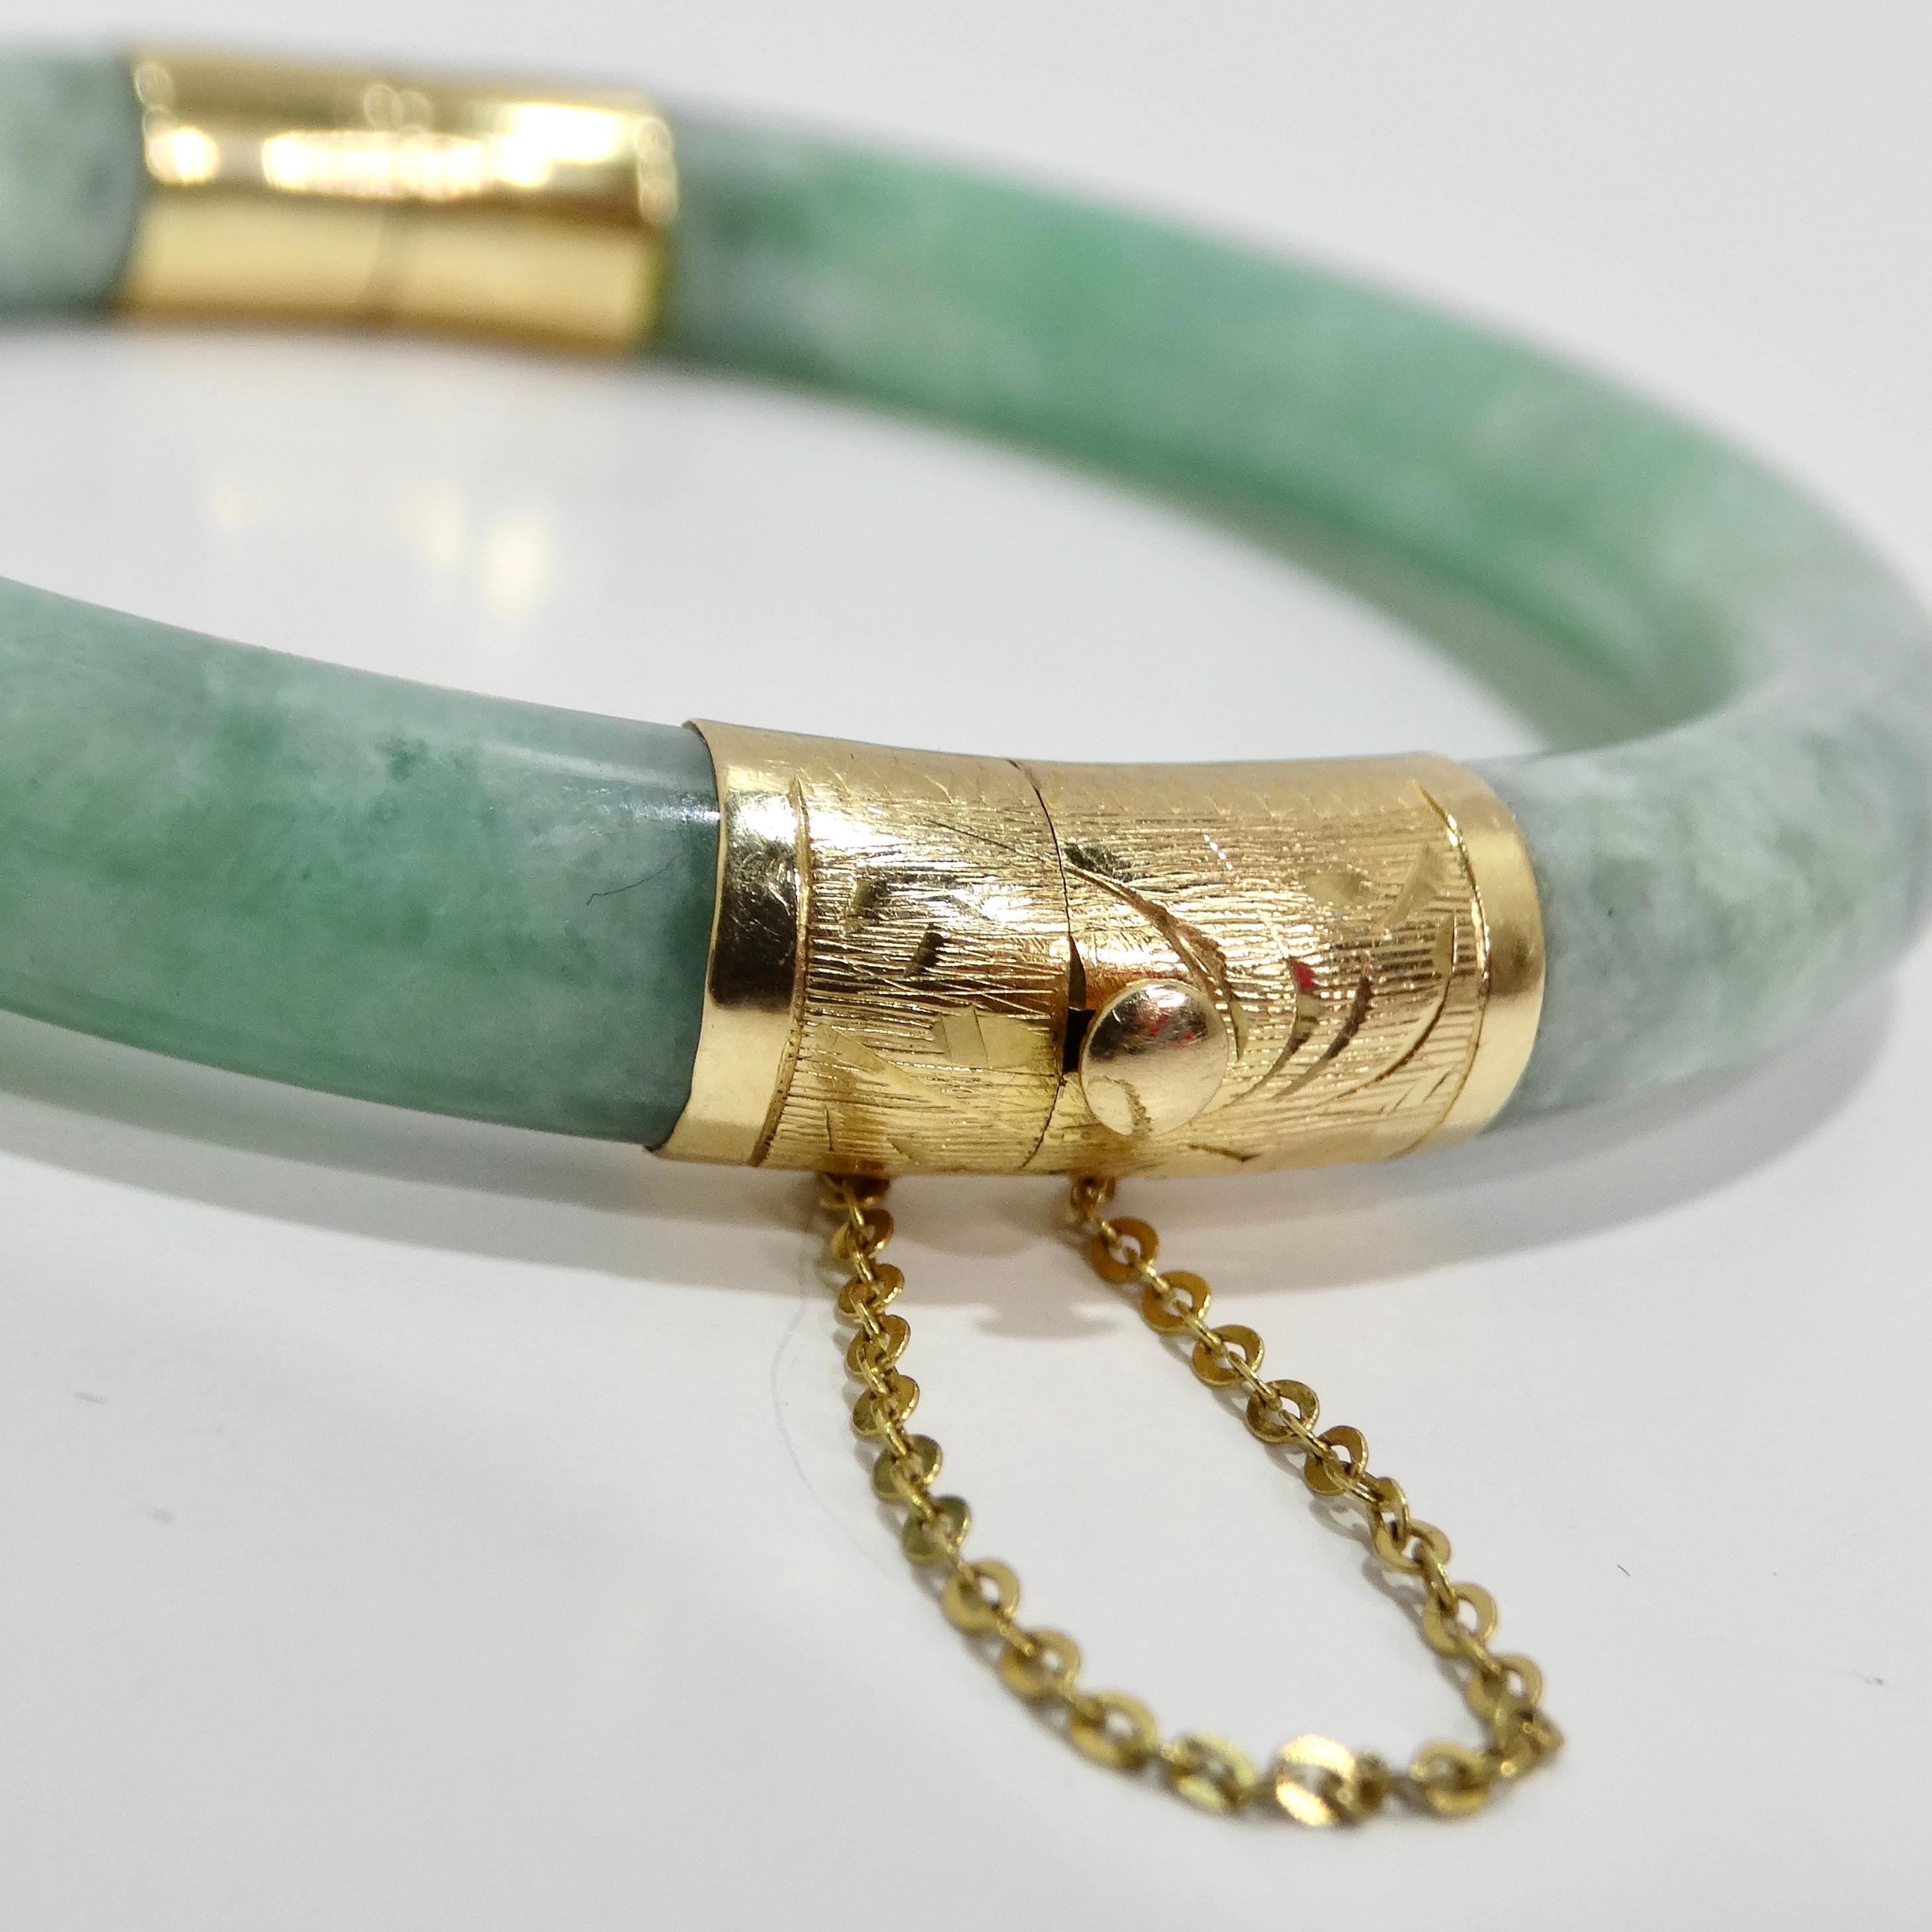 Indulge in timeless elegance with the 14K Gold Jade Jadeite Hinged Bangle Bracelet, a stunning piece that seamlessly blends precious materials with intricate craftsmanship. This estate jadeite bangle features a captivating natural light green